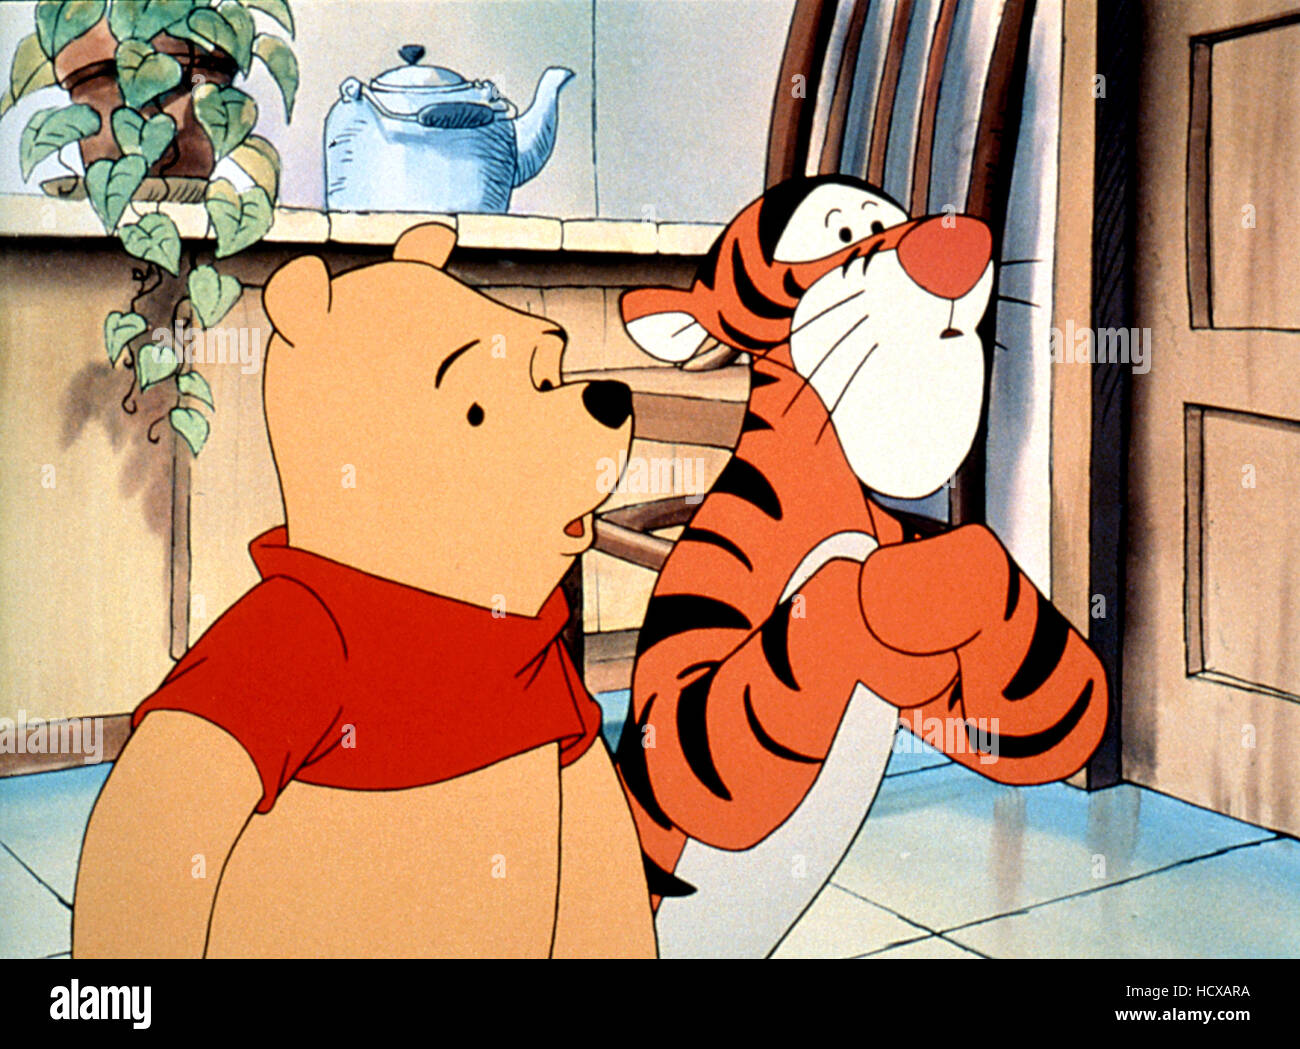 THE NEW ADVENTURES OF WINNIE THE POOH, Winnie the Pooh, Tigger, 1988 ...